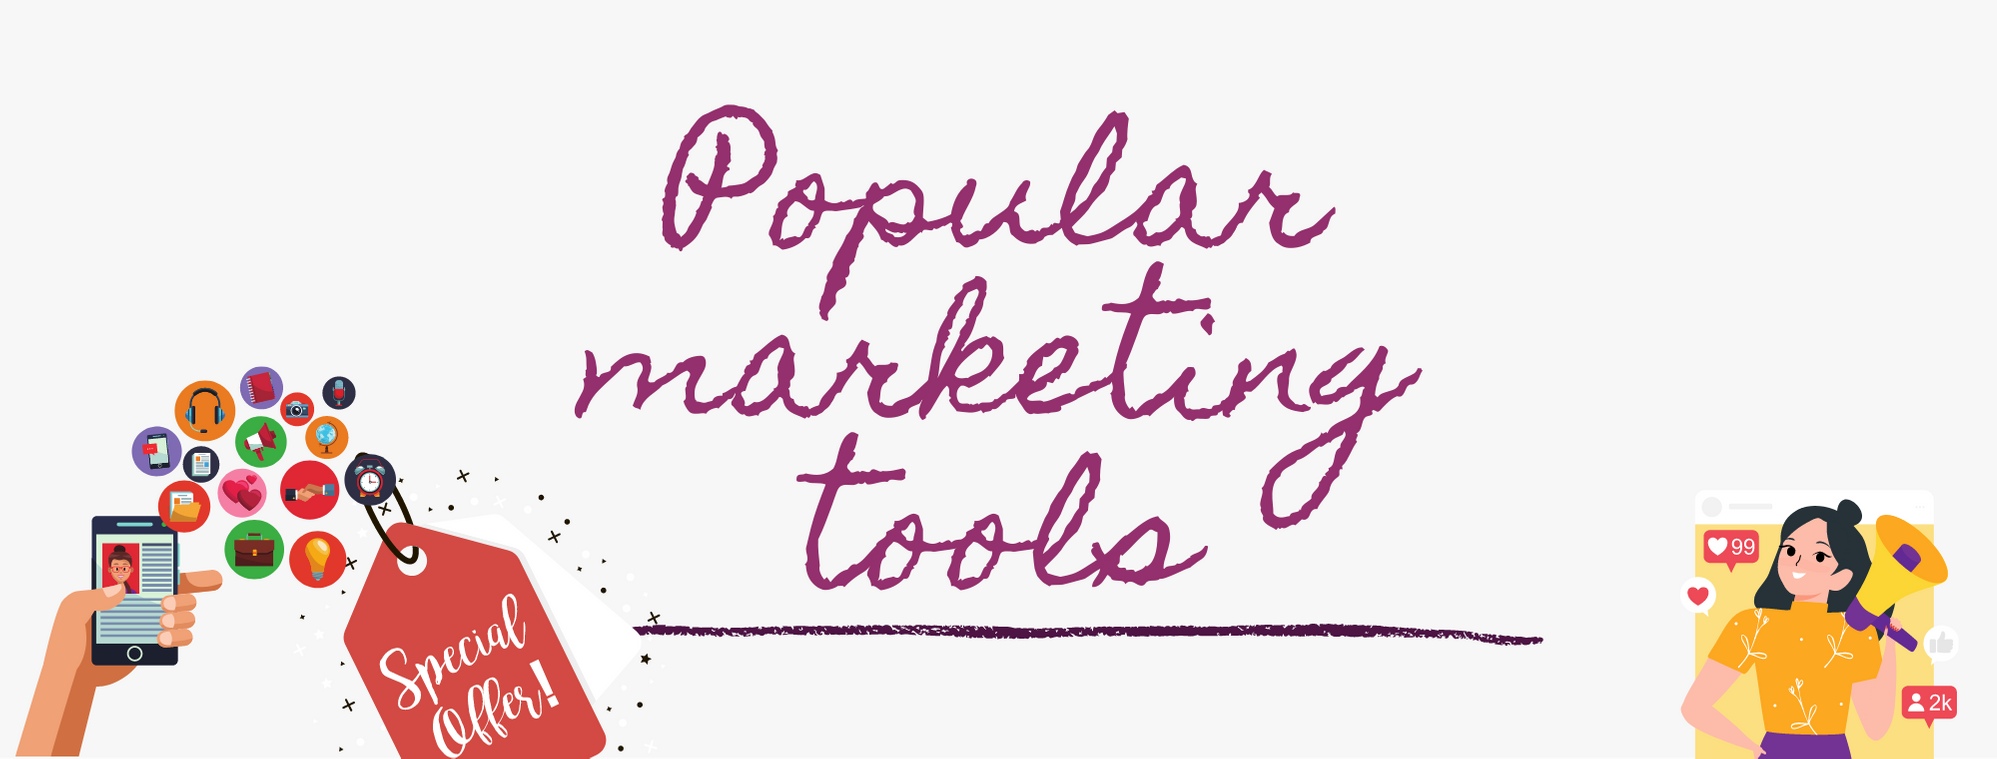 popular marketing tools for a freelance beauty business to increase reach and gain clients